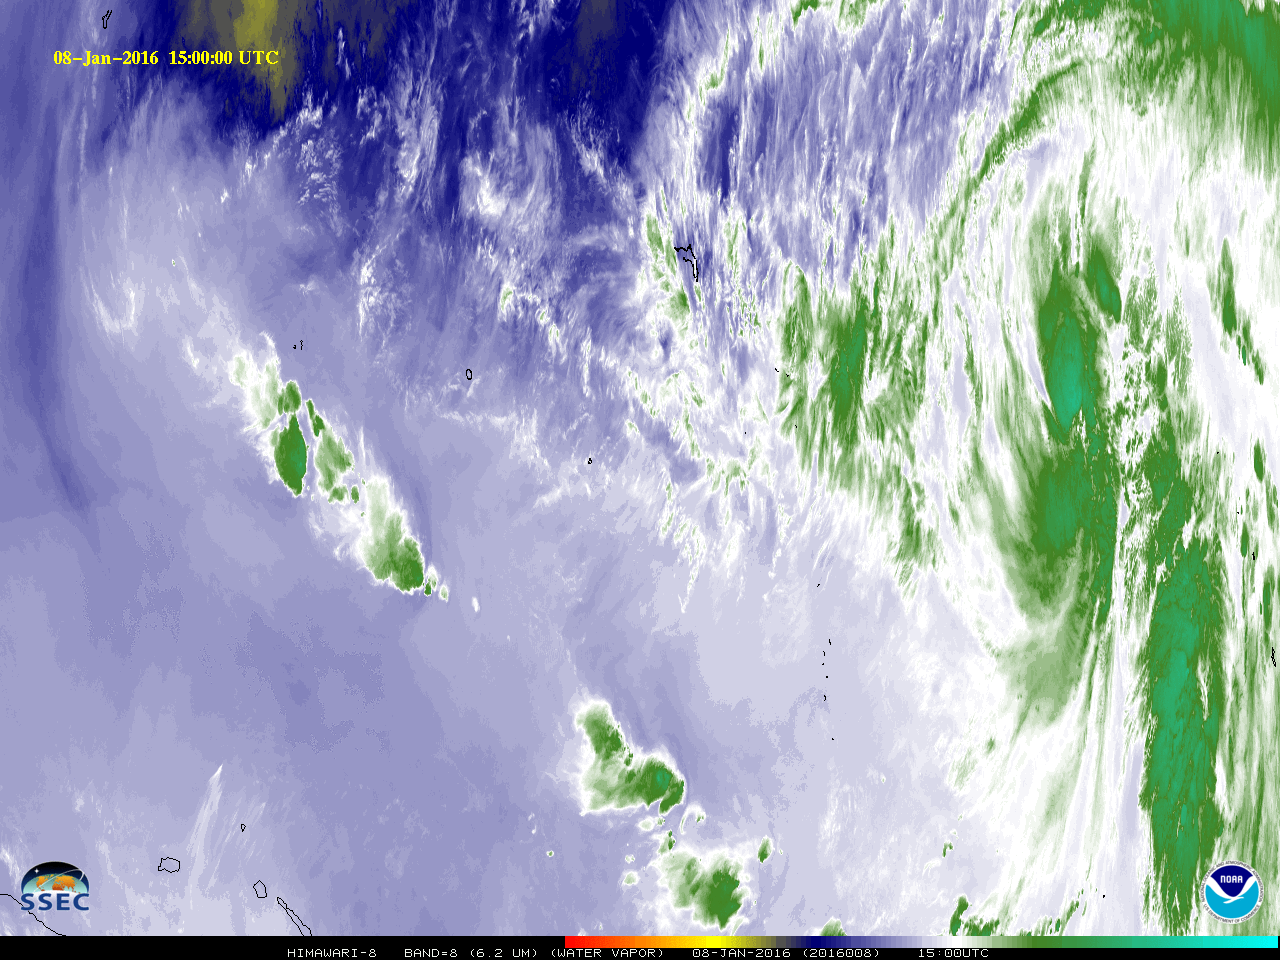 Himawari-8 Water Vapor (6.2 µm) infrared Imagery [click to animate], imagery Courtesy JMA